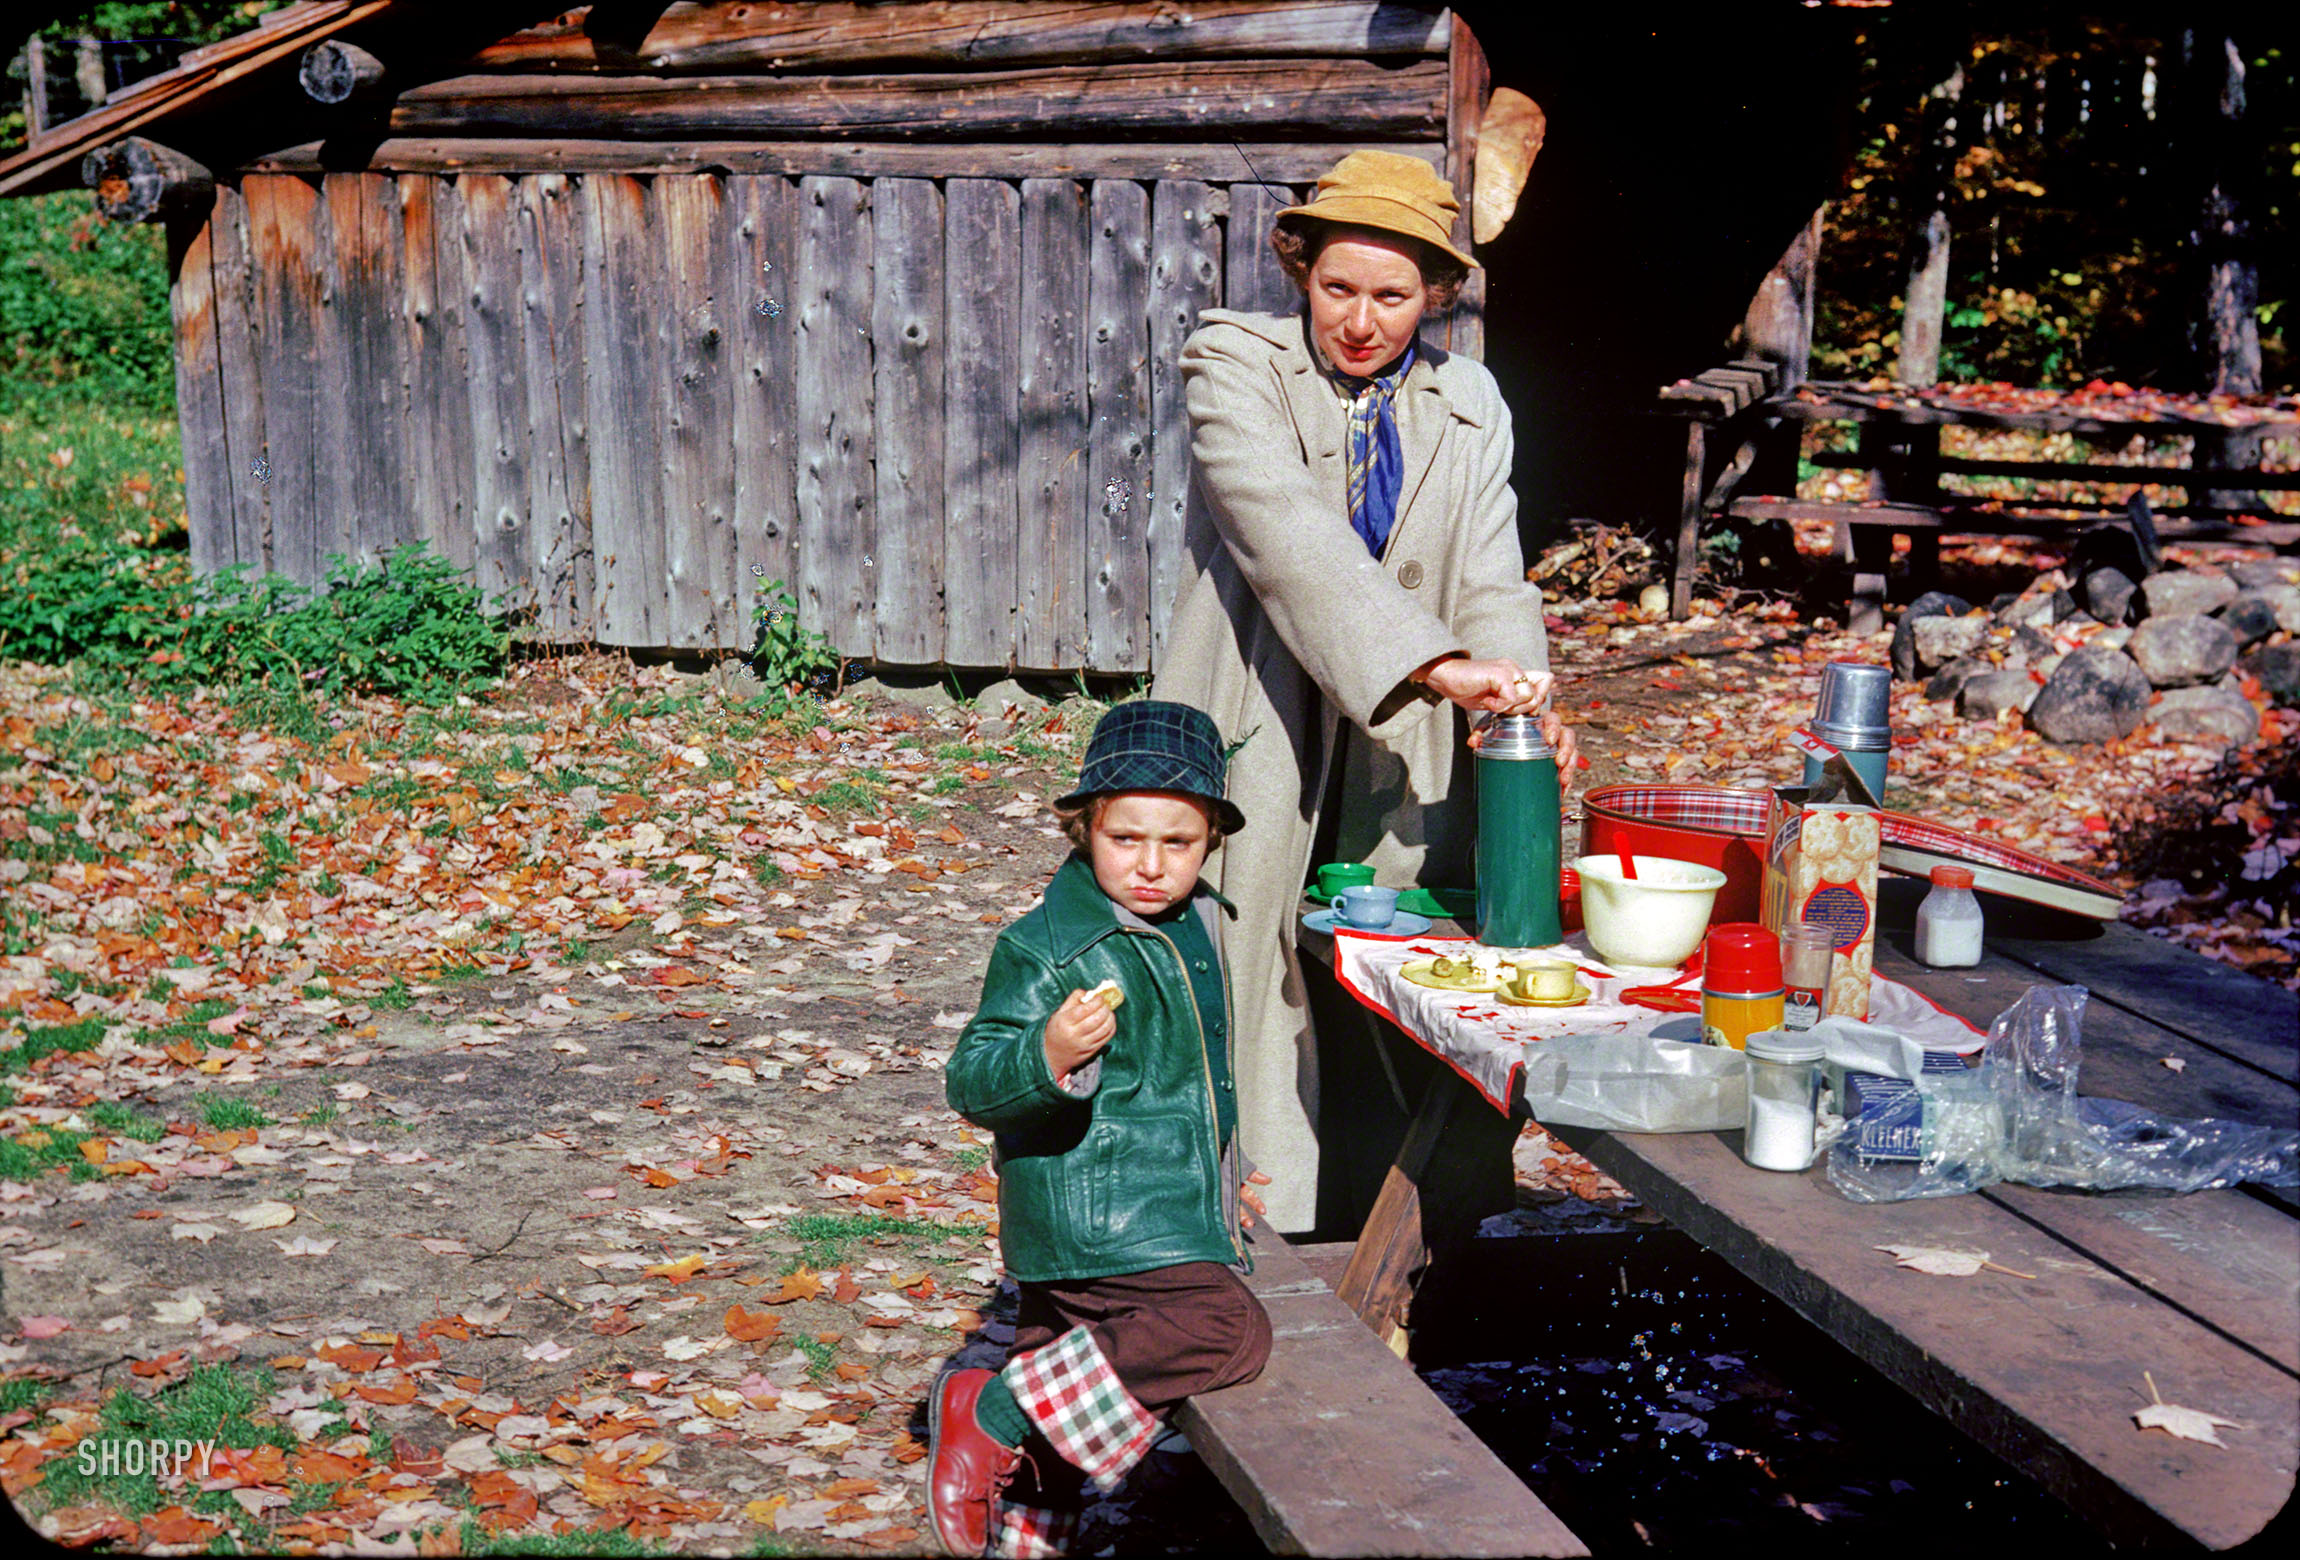 "Lunch at Wild River, 1952." Linda and her mom, with Thermoses in triplicate. 35mm color slide from the "Linda" Kodachromes. View full size.